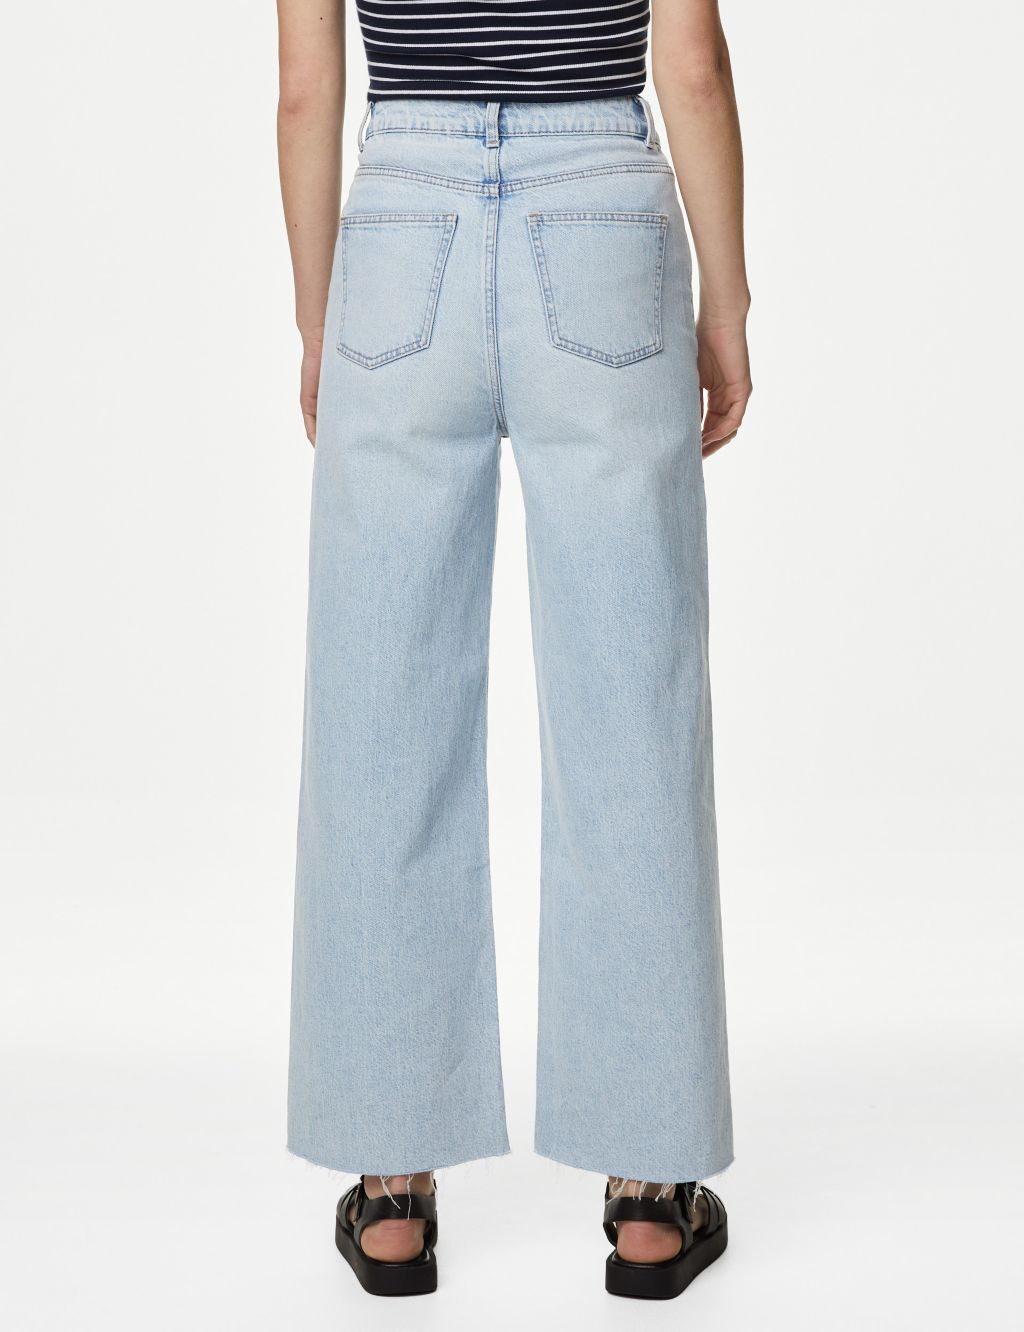 High Waisted Wide Leg Ankle Grazer Jeans image 3